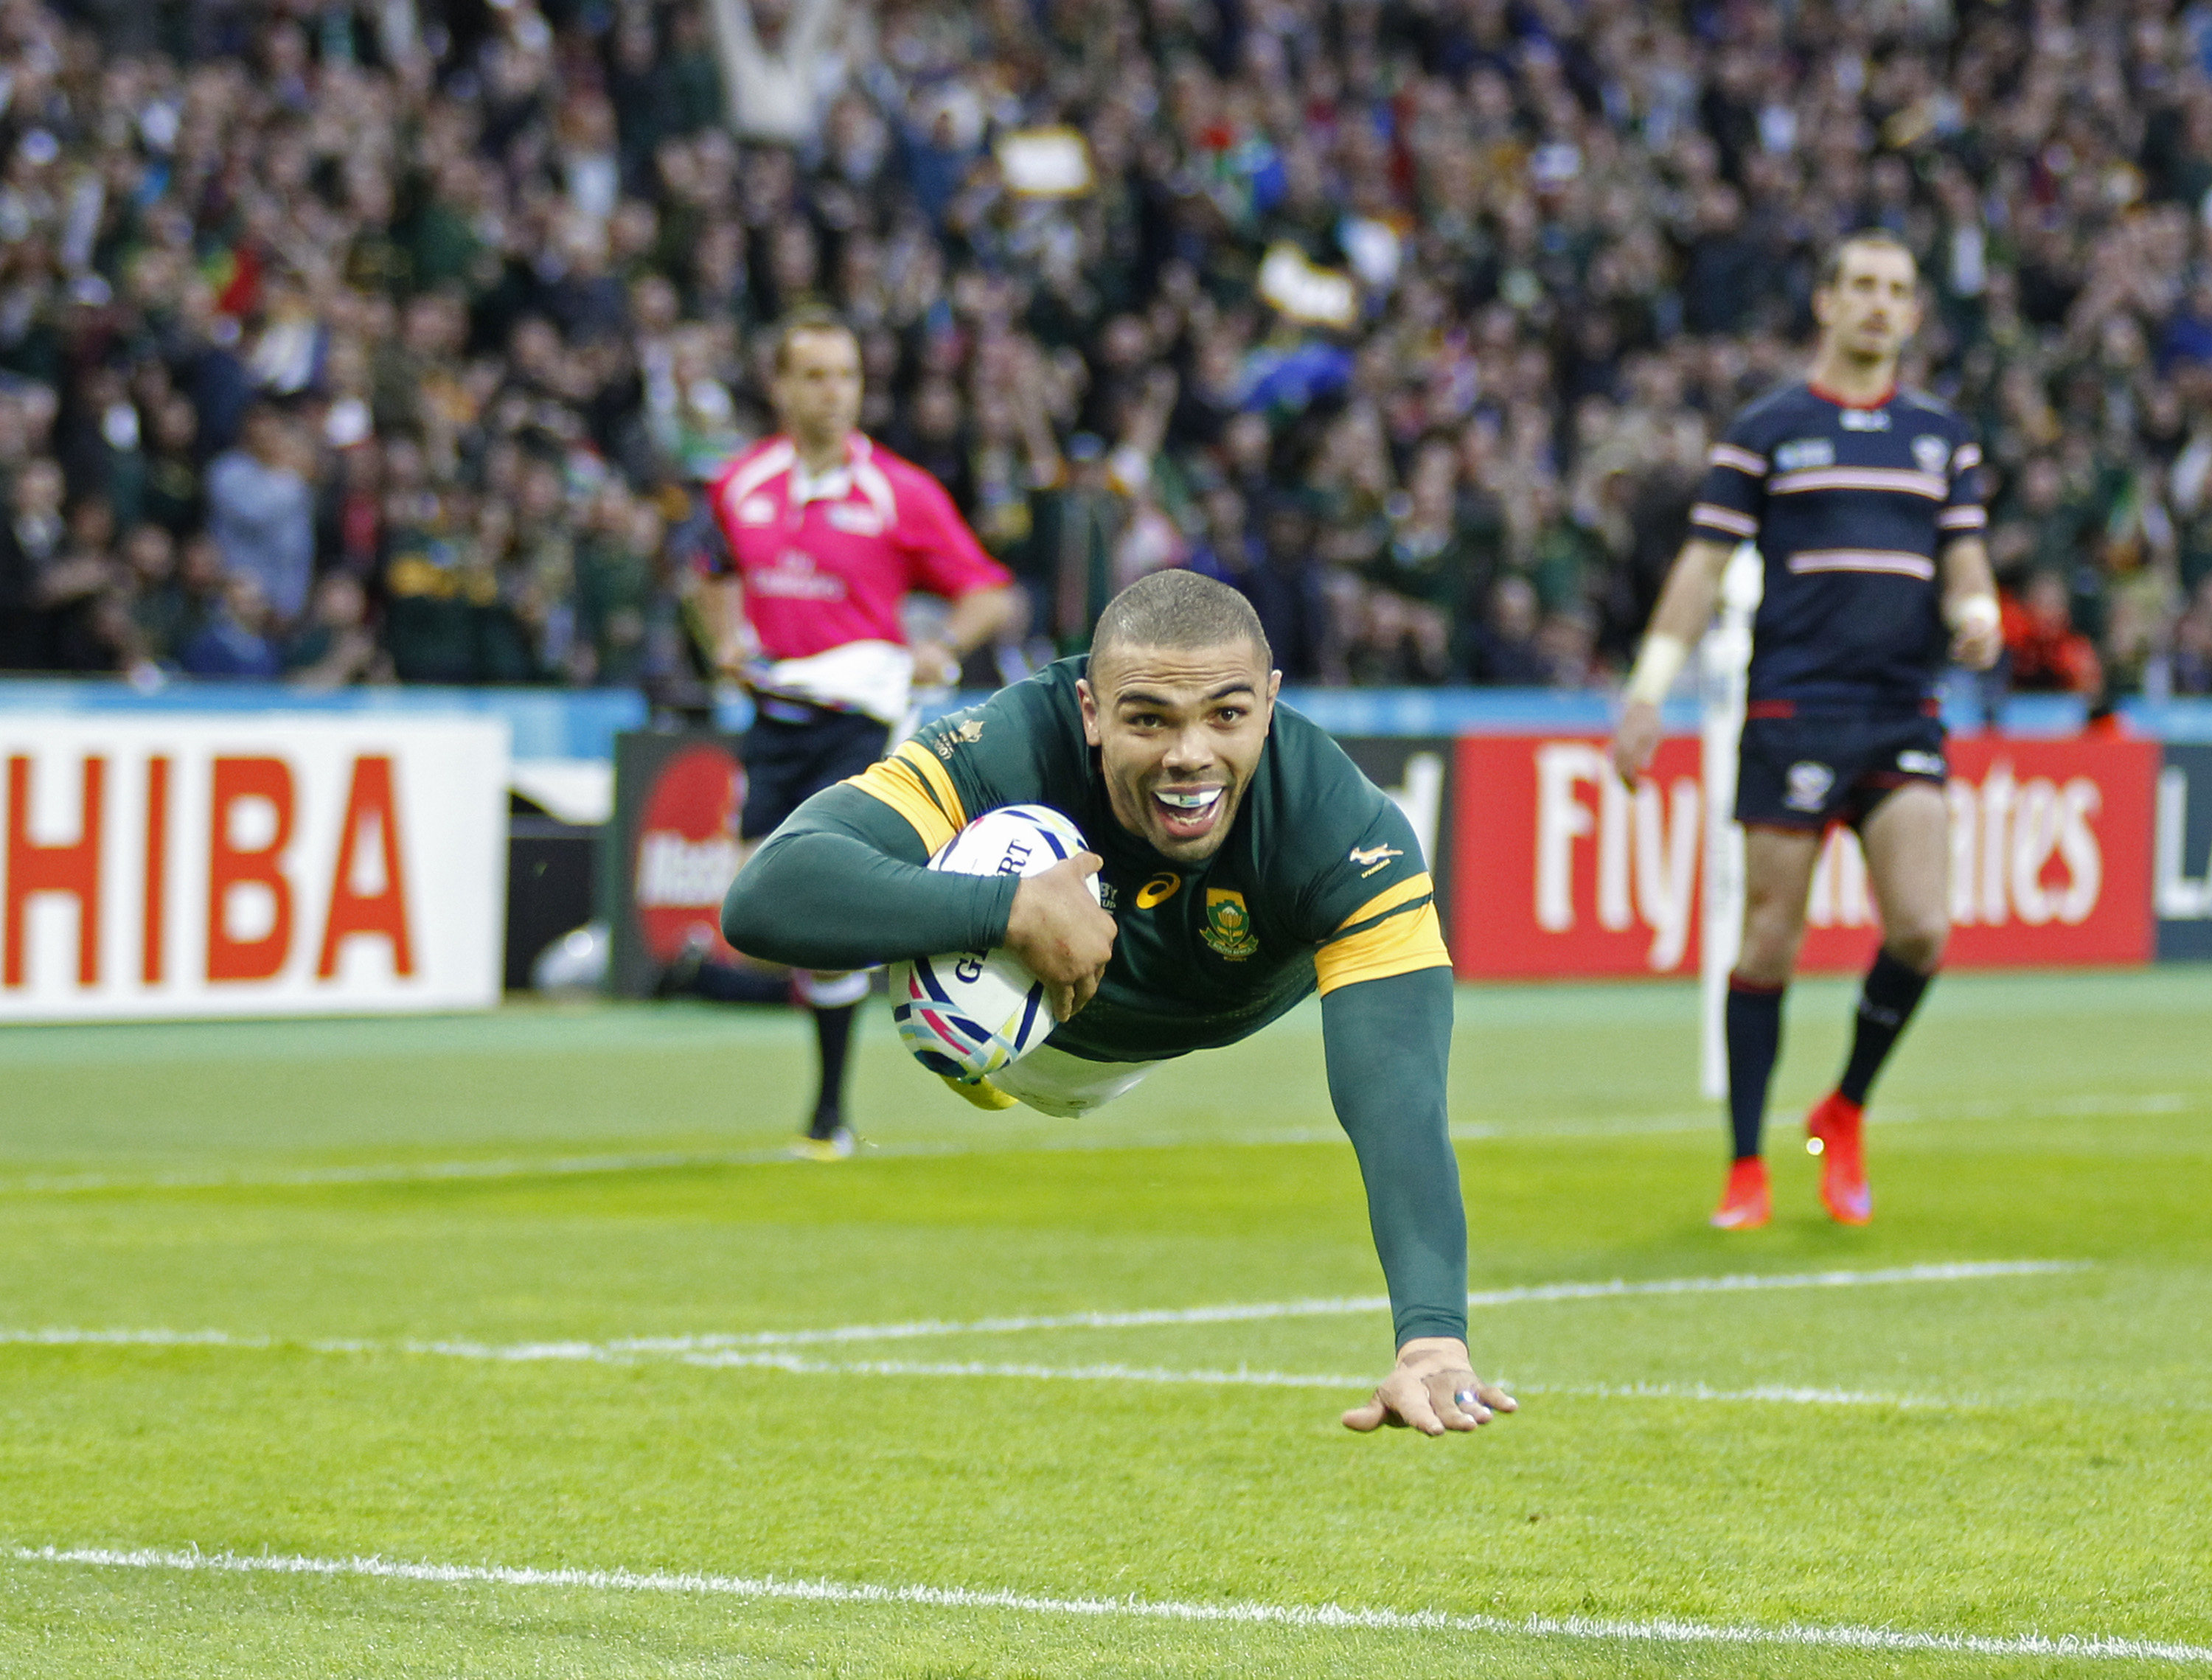 Bryan Habana’s international debut flashed past in a blur of nerves. Photo: Getty Images